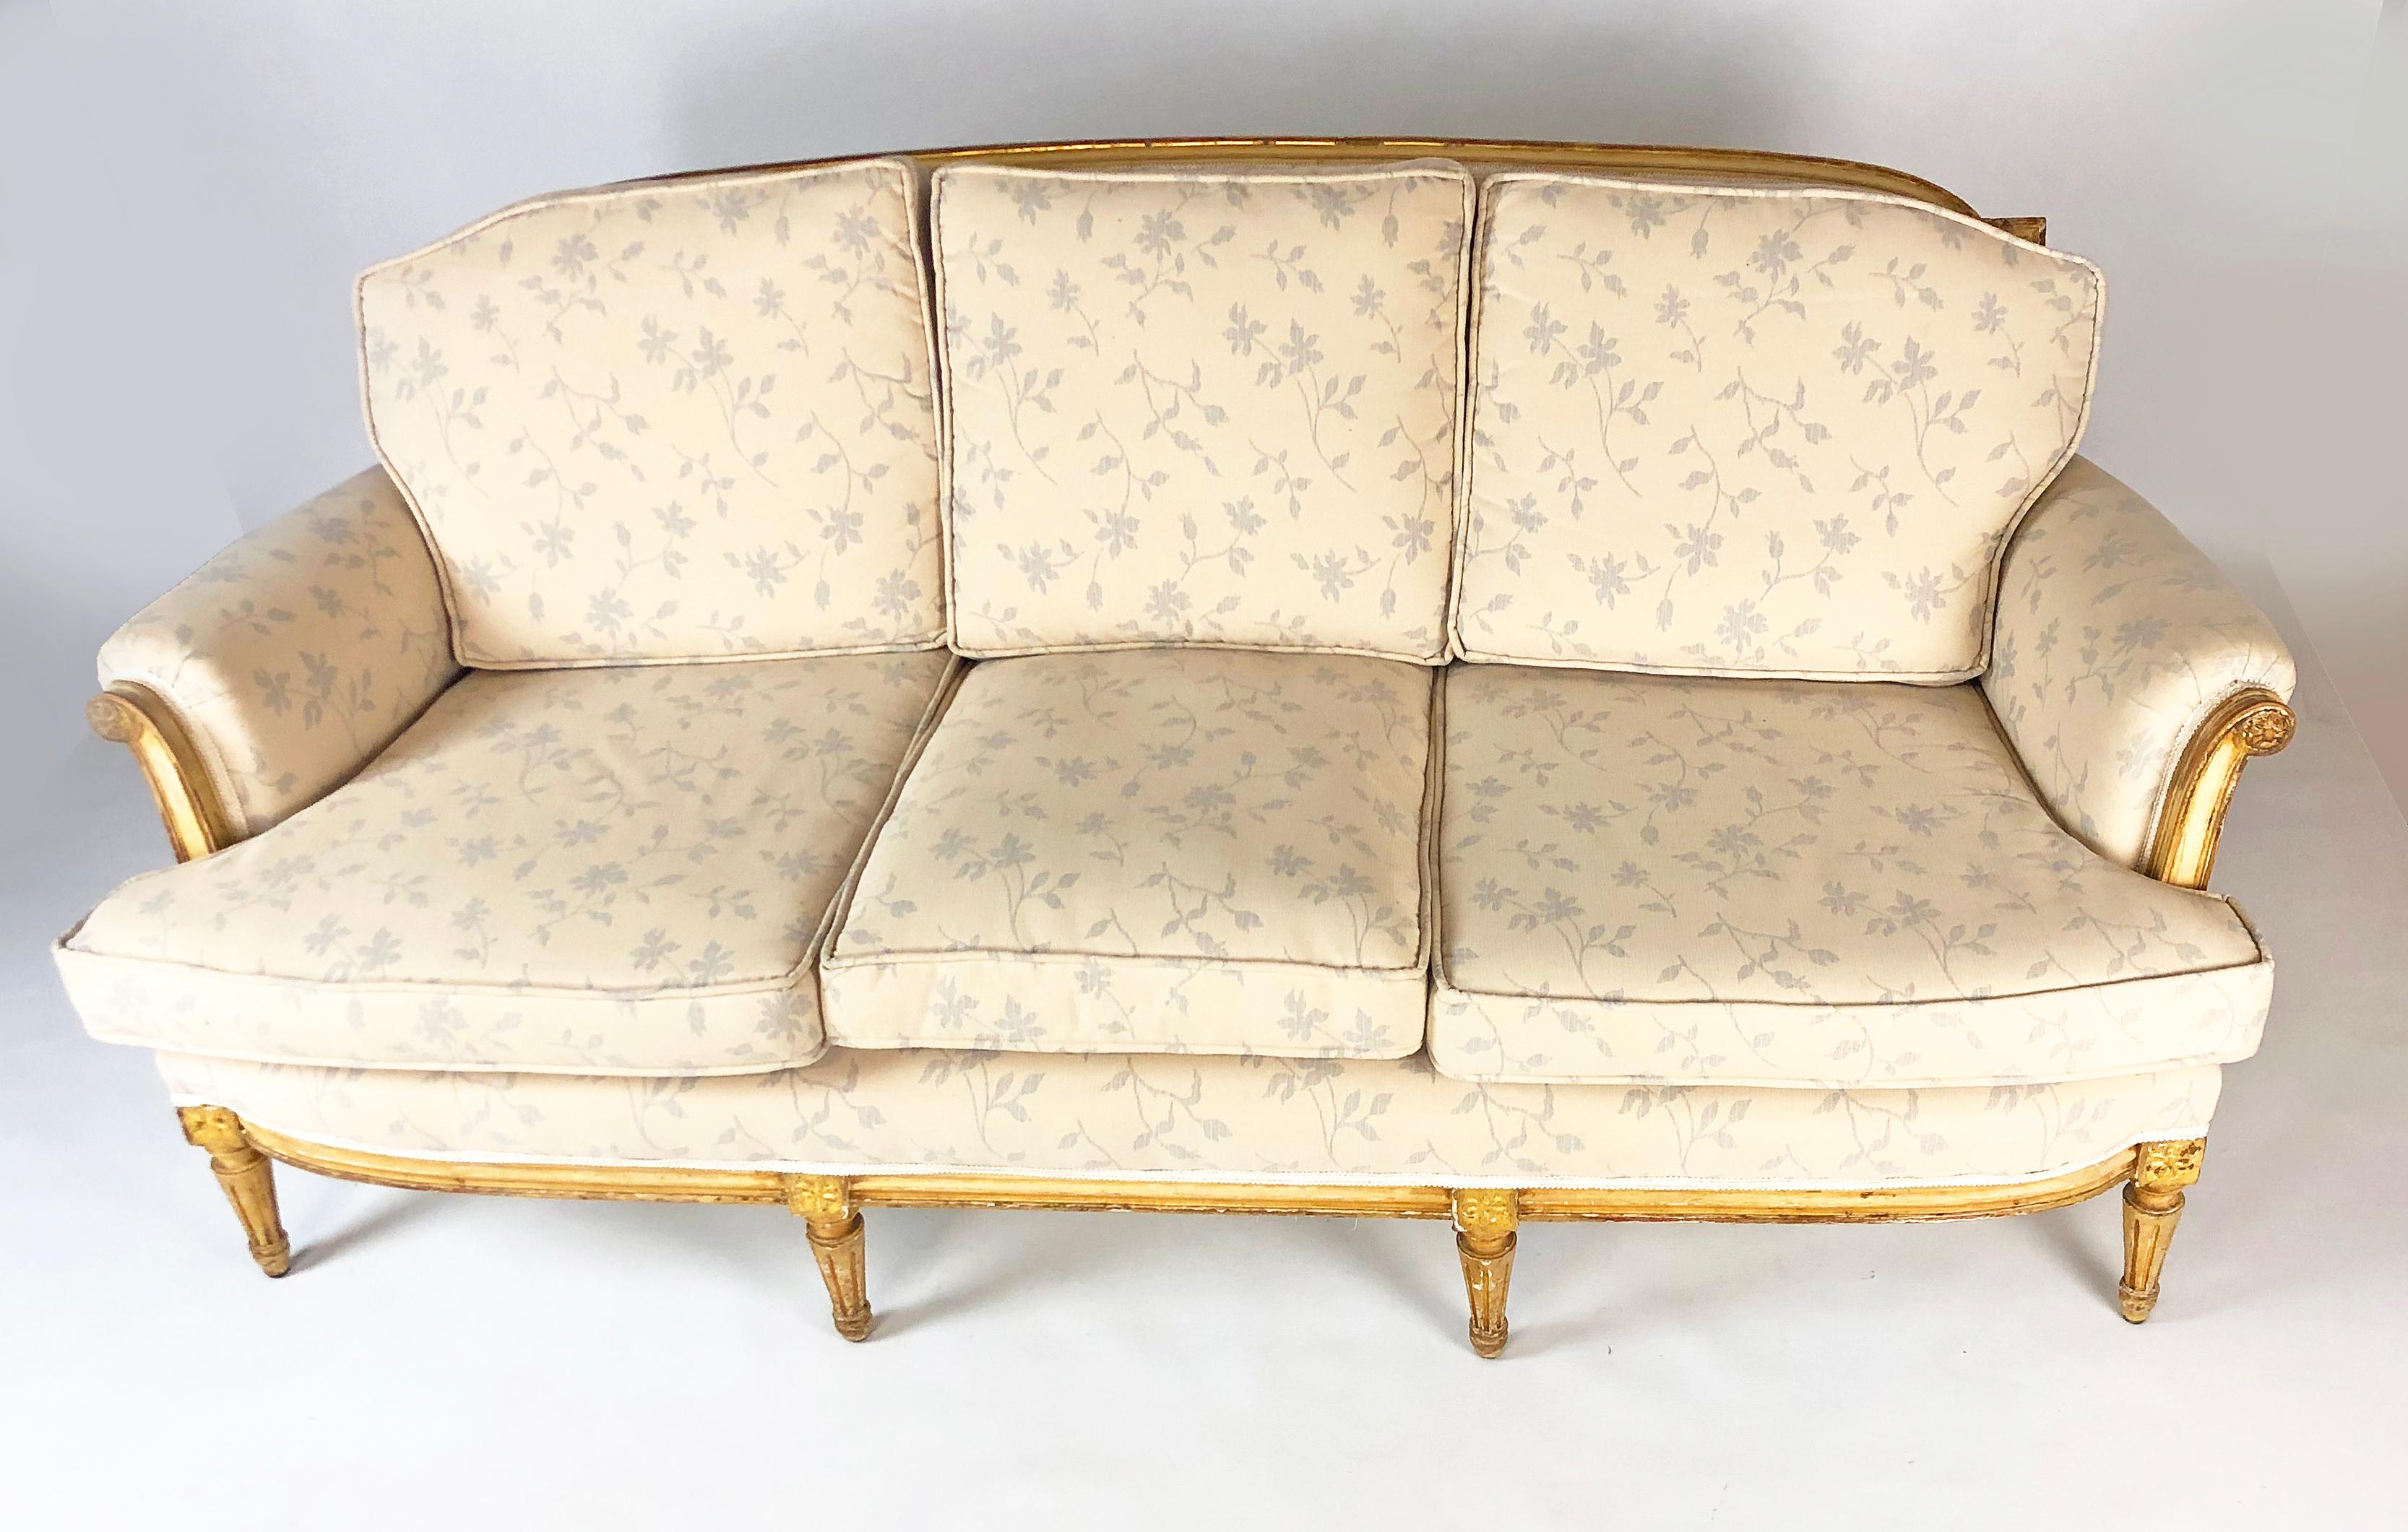 Outstandingly comfortable and attractive antique French Louis XVI style sofa, probably made during the last quarter of the 19th century, if not earlier. It features 8 carved and gilt beechwood legs and frame with lovely patina. It has depth of